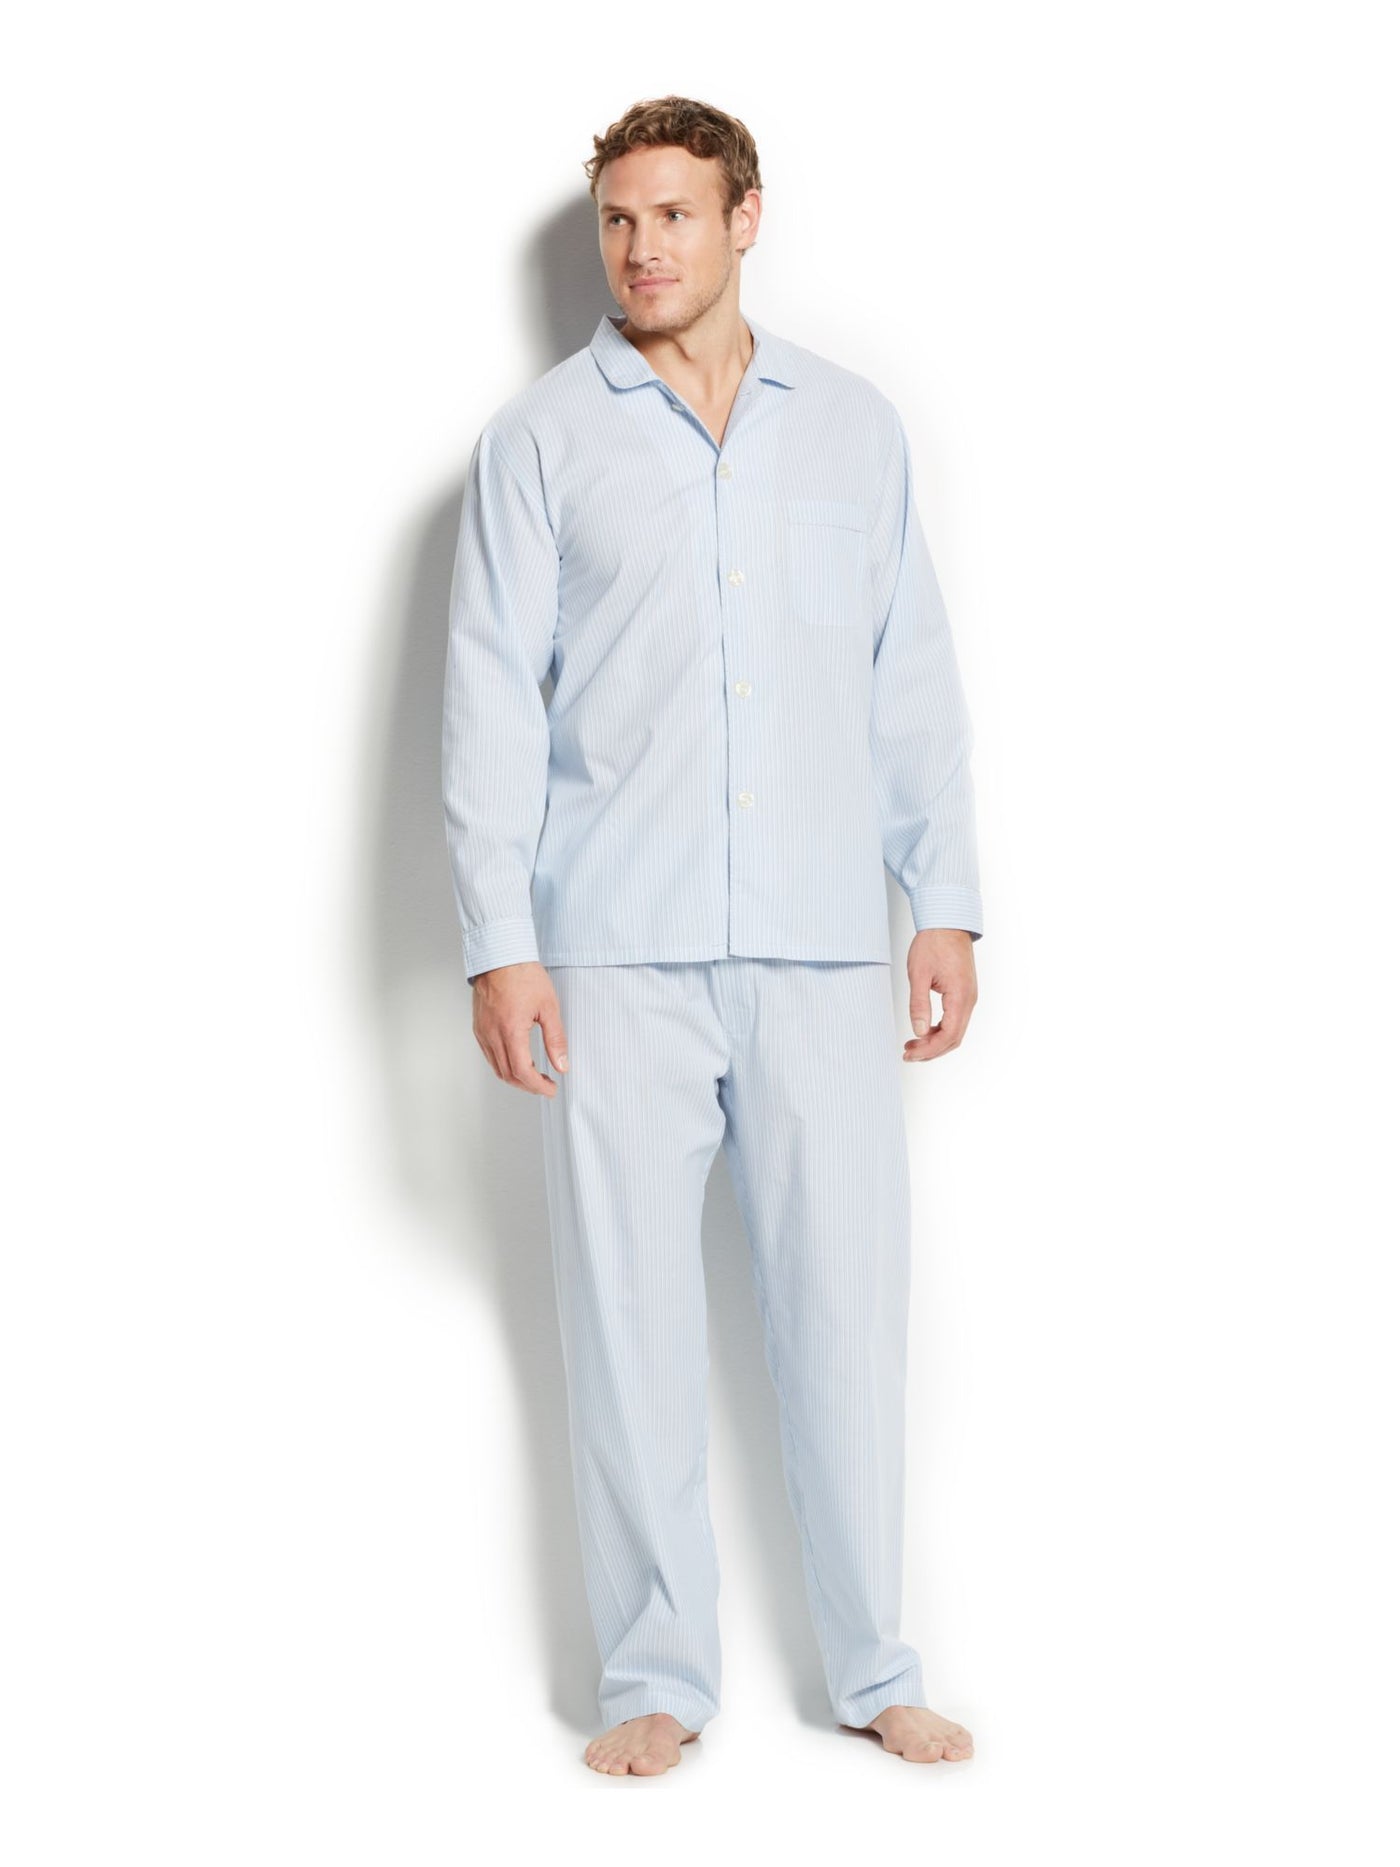 CLUBROOM Mens Blue Striped Pocketed Long Sleeve Button Up Top Straight leg Pants Pajamas XL